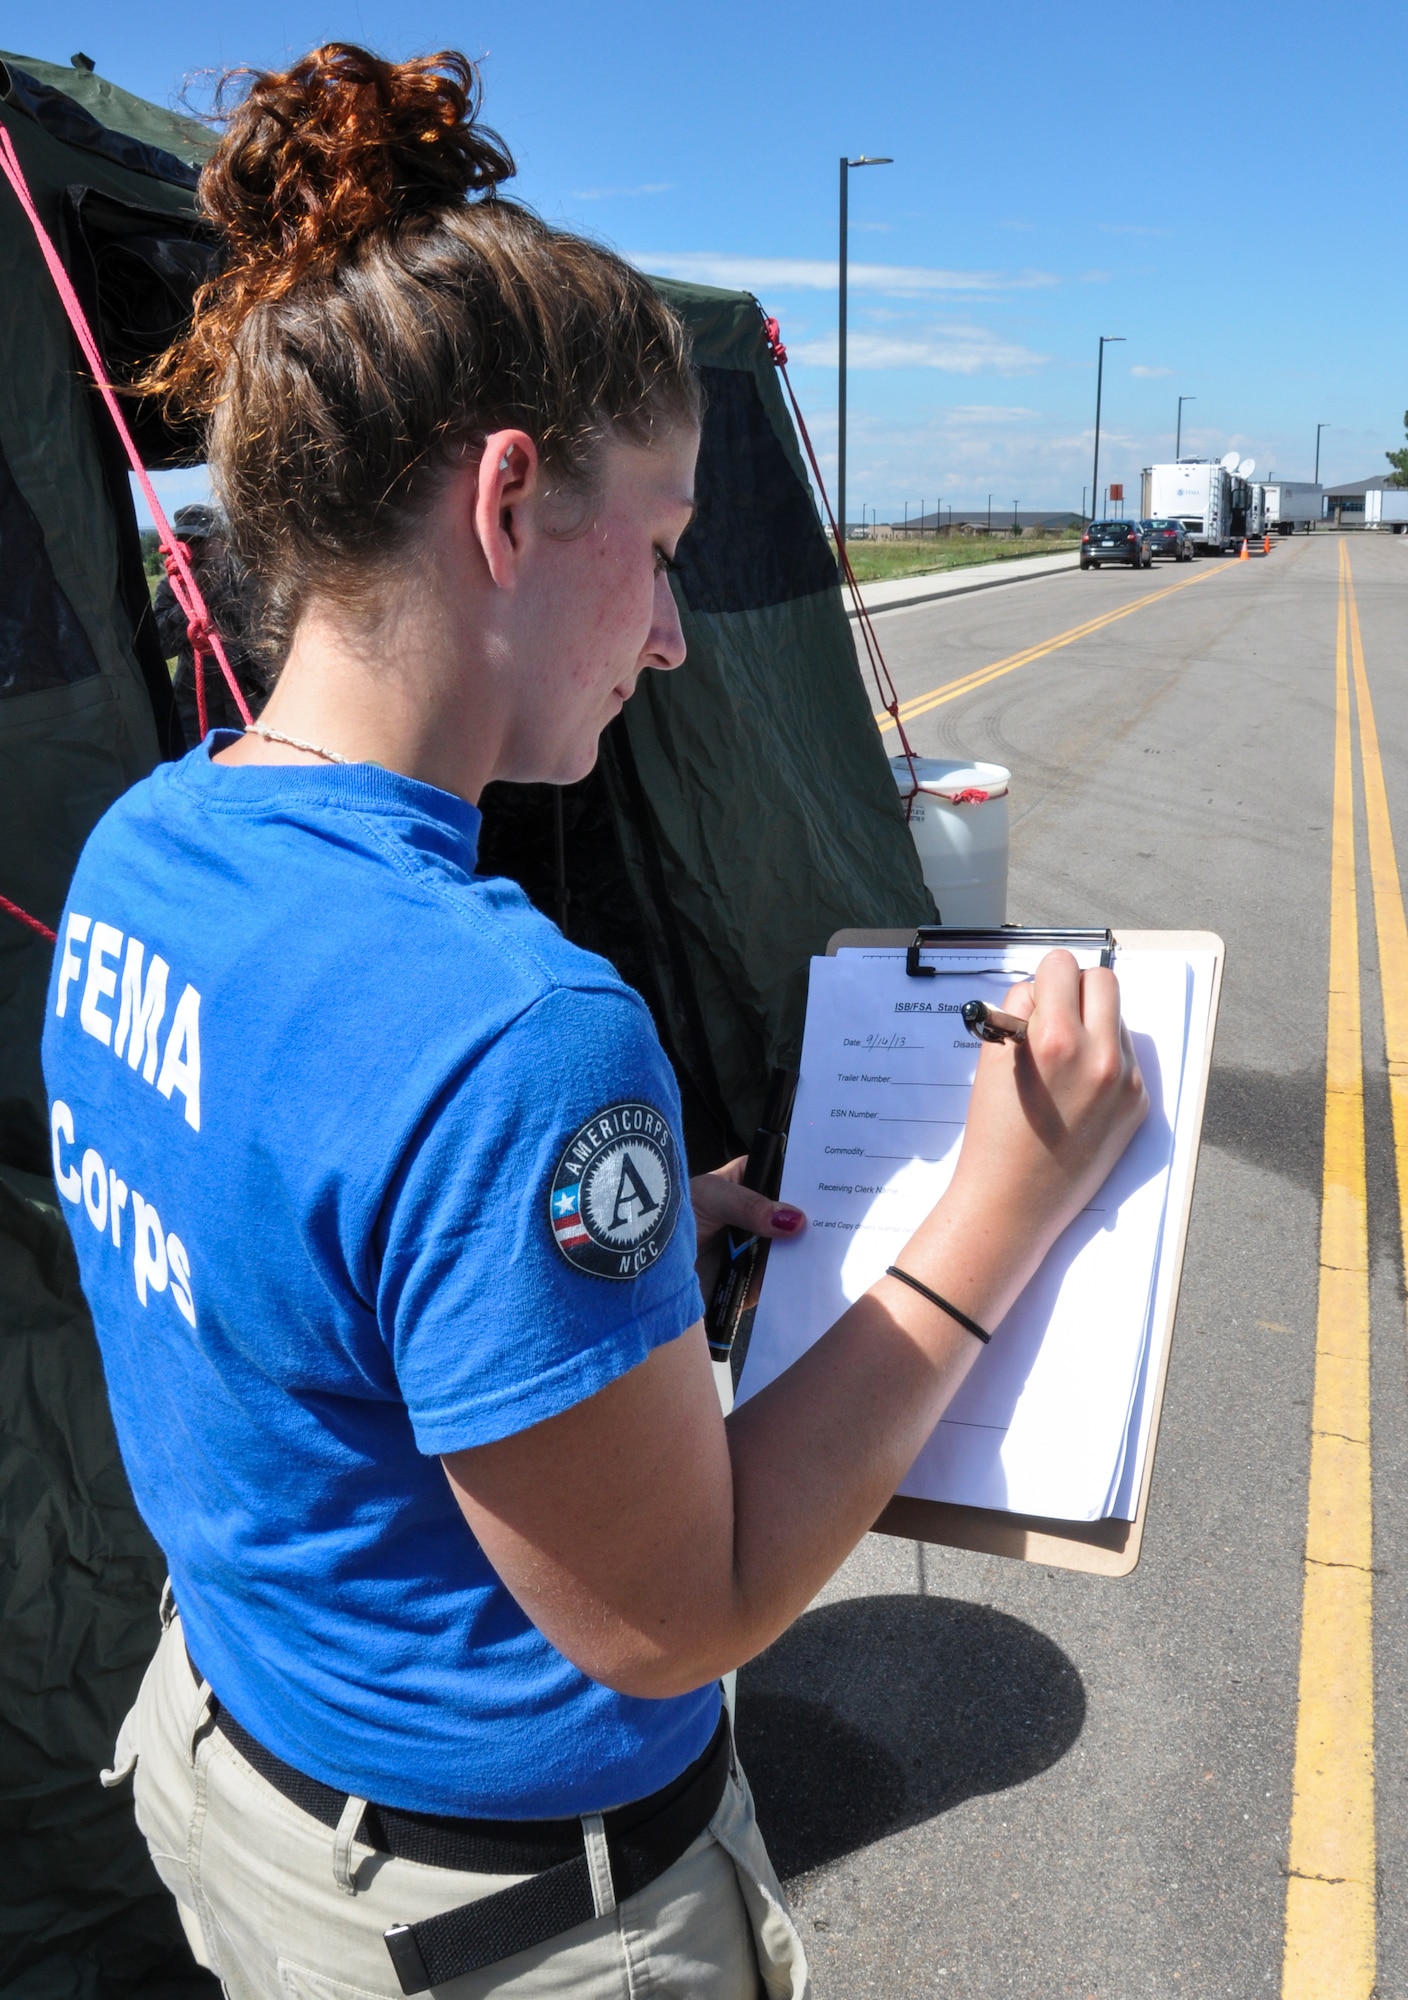 Denise Corrieri, Federal Emergency Management Agency Corps logistics specialist team member, checks a staging list Sept. 16, 2013, at Buckley Air Force Base, Colo. FEMA Corps lent a hand by checking logistics and inventorying trucks in support of flood relief in Colorado. Major flood relief efforts became necessary after up to 15 inches of rain fell along the Front Range causing flash flooding, according to weather services. (U.S. Air Force photo by Staff Sgt. Nicholas Rau/Released)